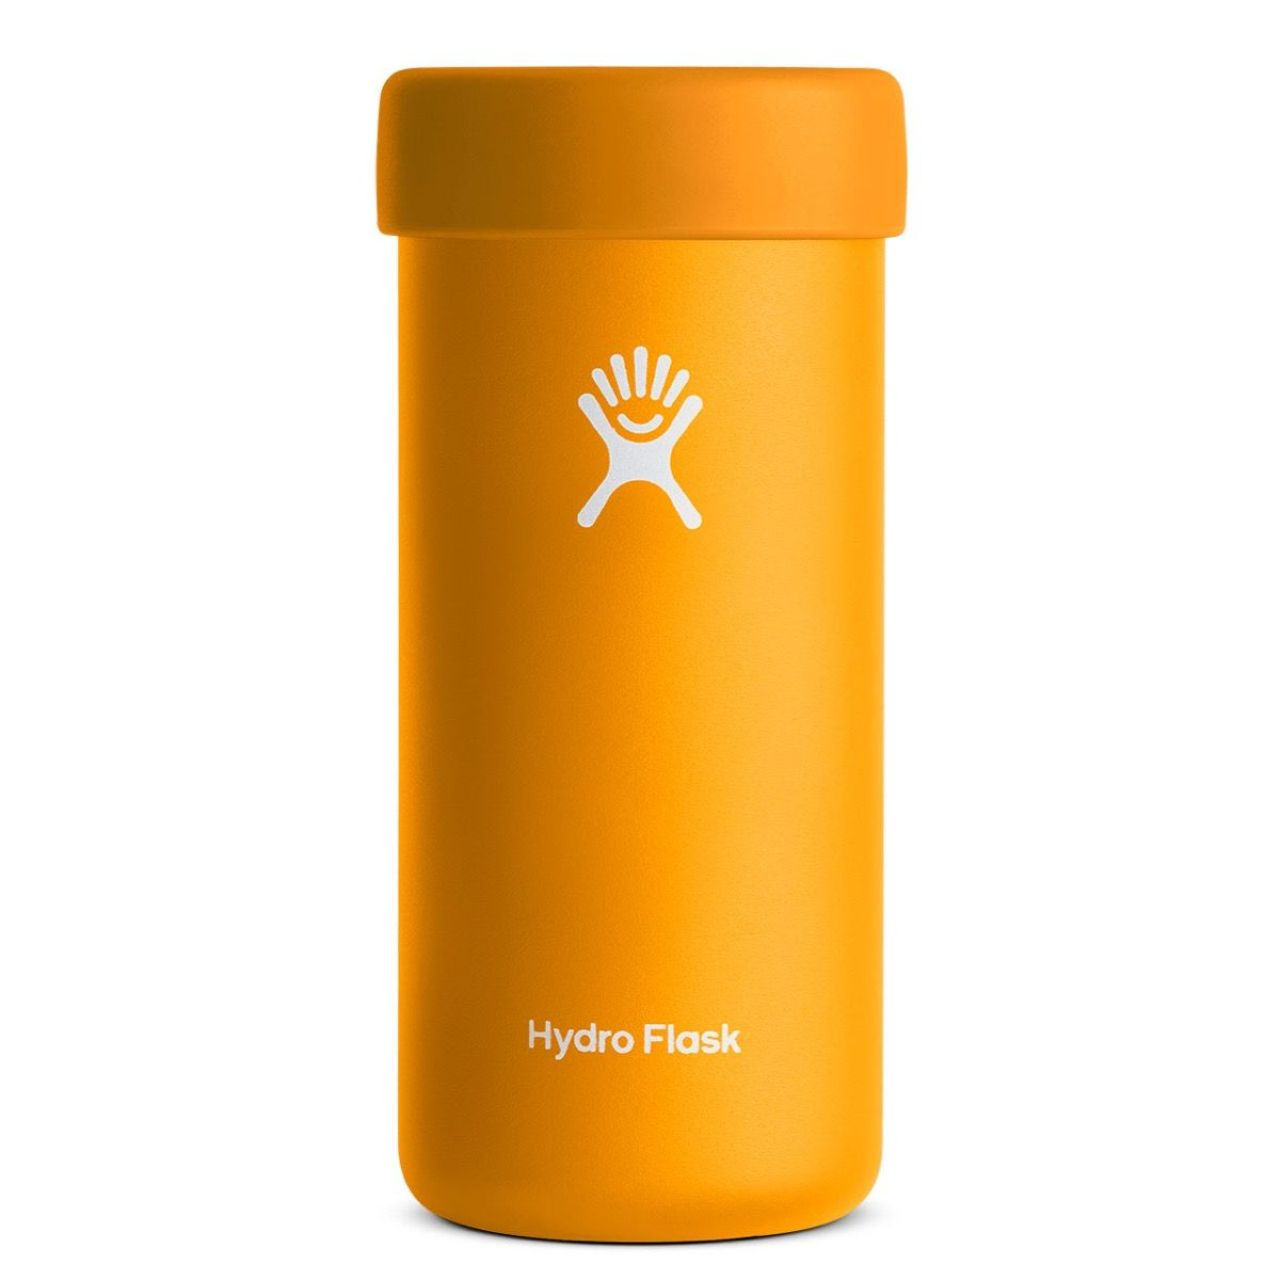 Hydroflask slim can cooler cup